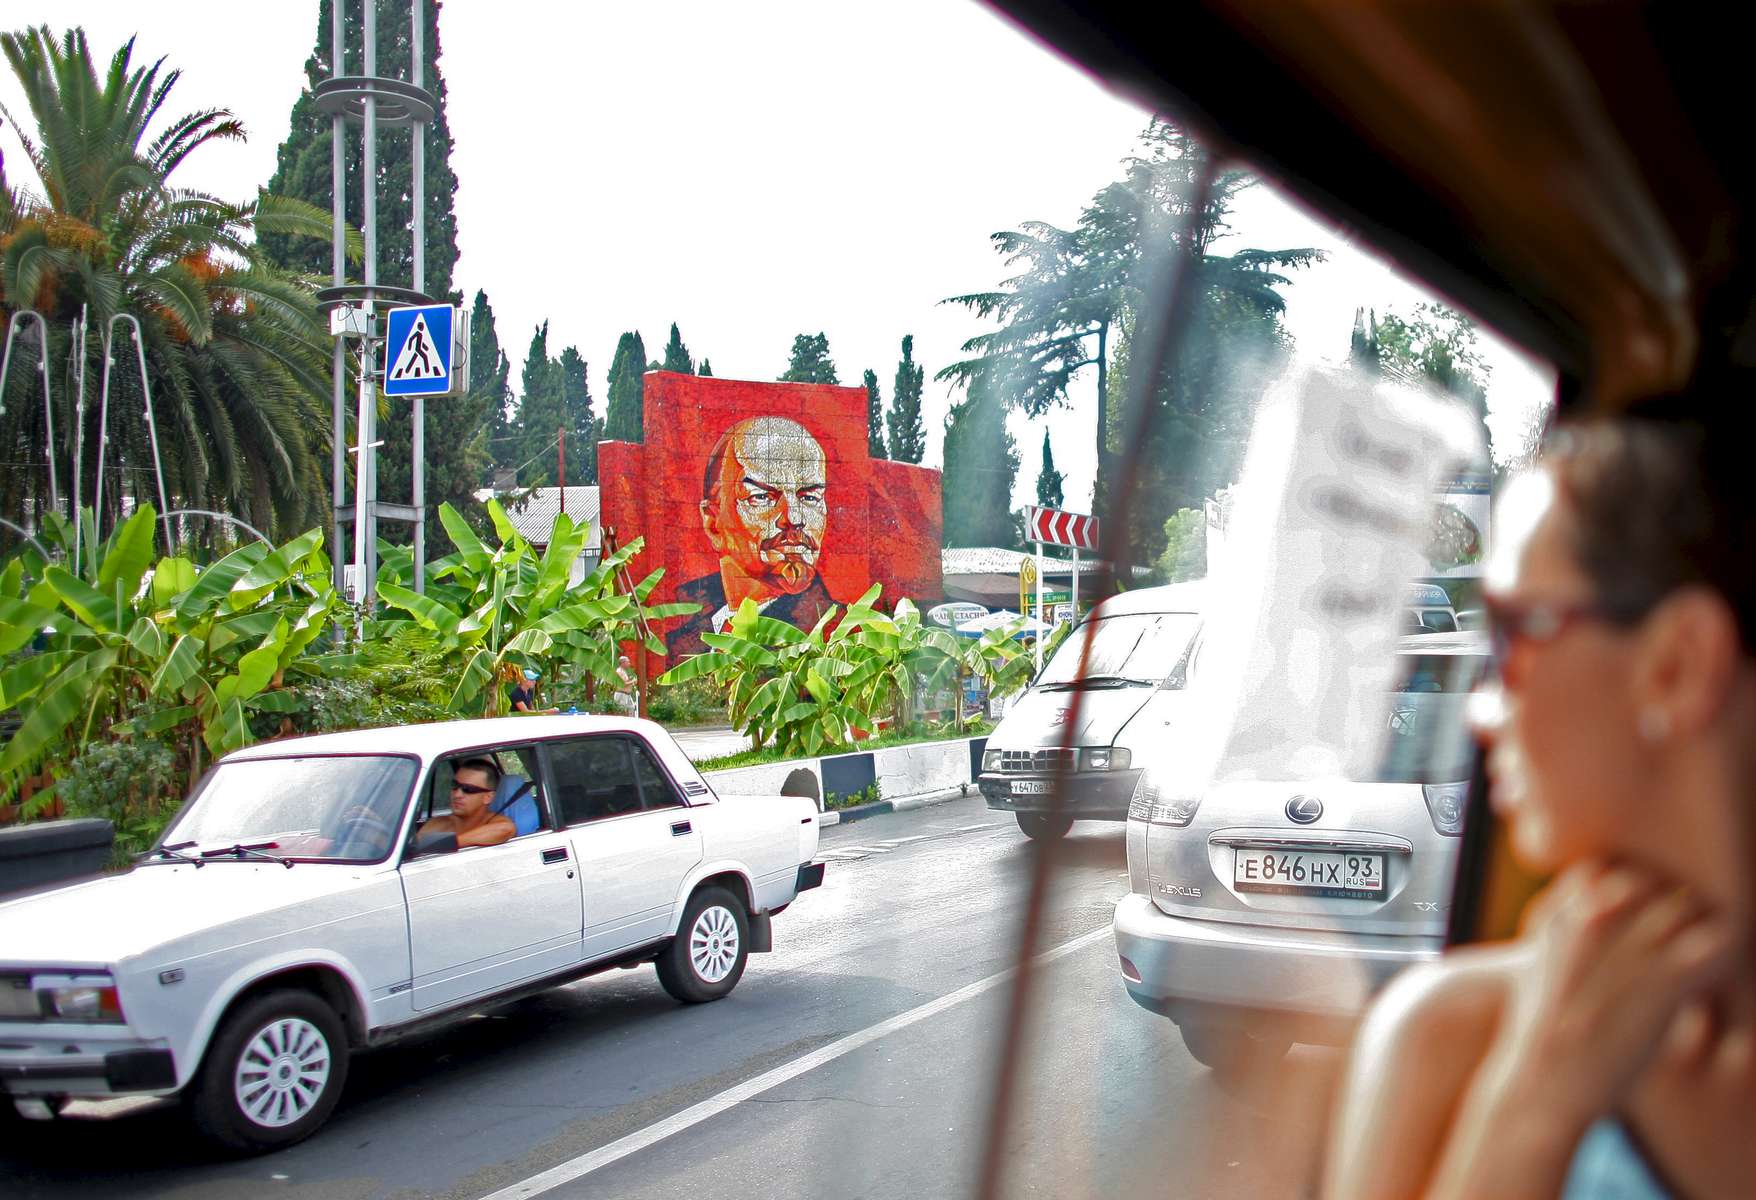 Investors have flooded the Russian beach town of Sochi since its award as the 2014 Winter Olympics location in an effort to create a Mediterranean-style resort. Here, a bus rider glances at a mural of the Russian communist politician Vladimir Lenin on Tuesday, August 12, 2008. As the mountainous Black Sea resort Sochi, Russia, prepares for the Winter Olympic games scheduled there for 2014, it emerges as a place replete with contradictions -- glitzy clubs and impoverished street vendors, progress and repression, Westernization and former Eastern bloc ideologies.(For The New York Times)